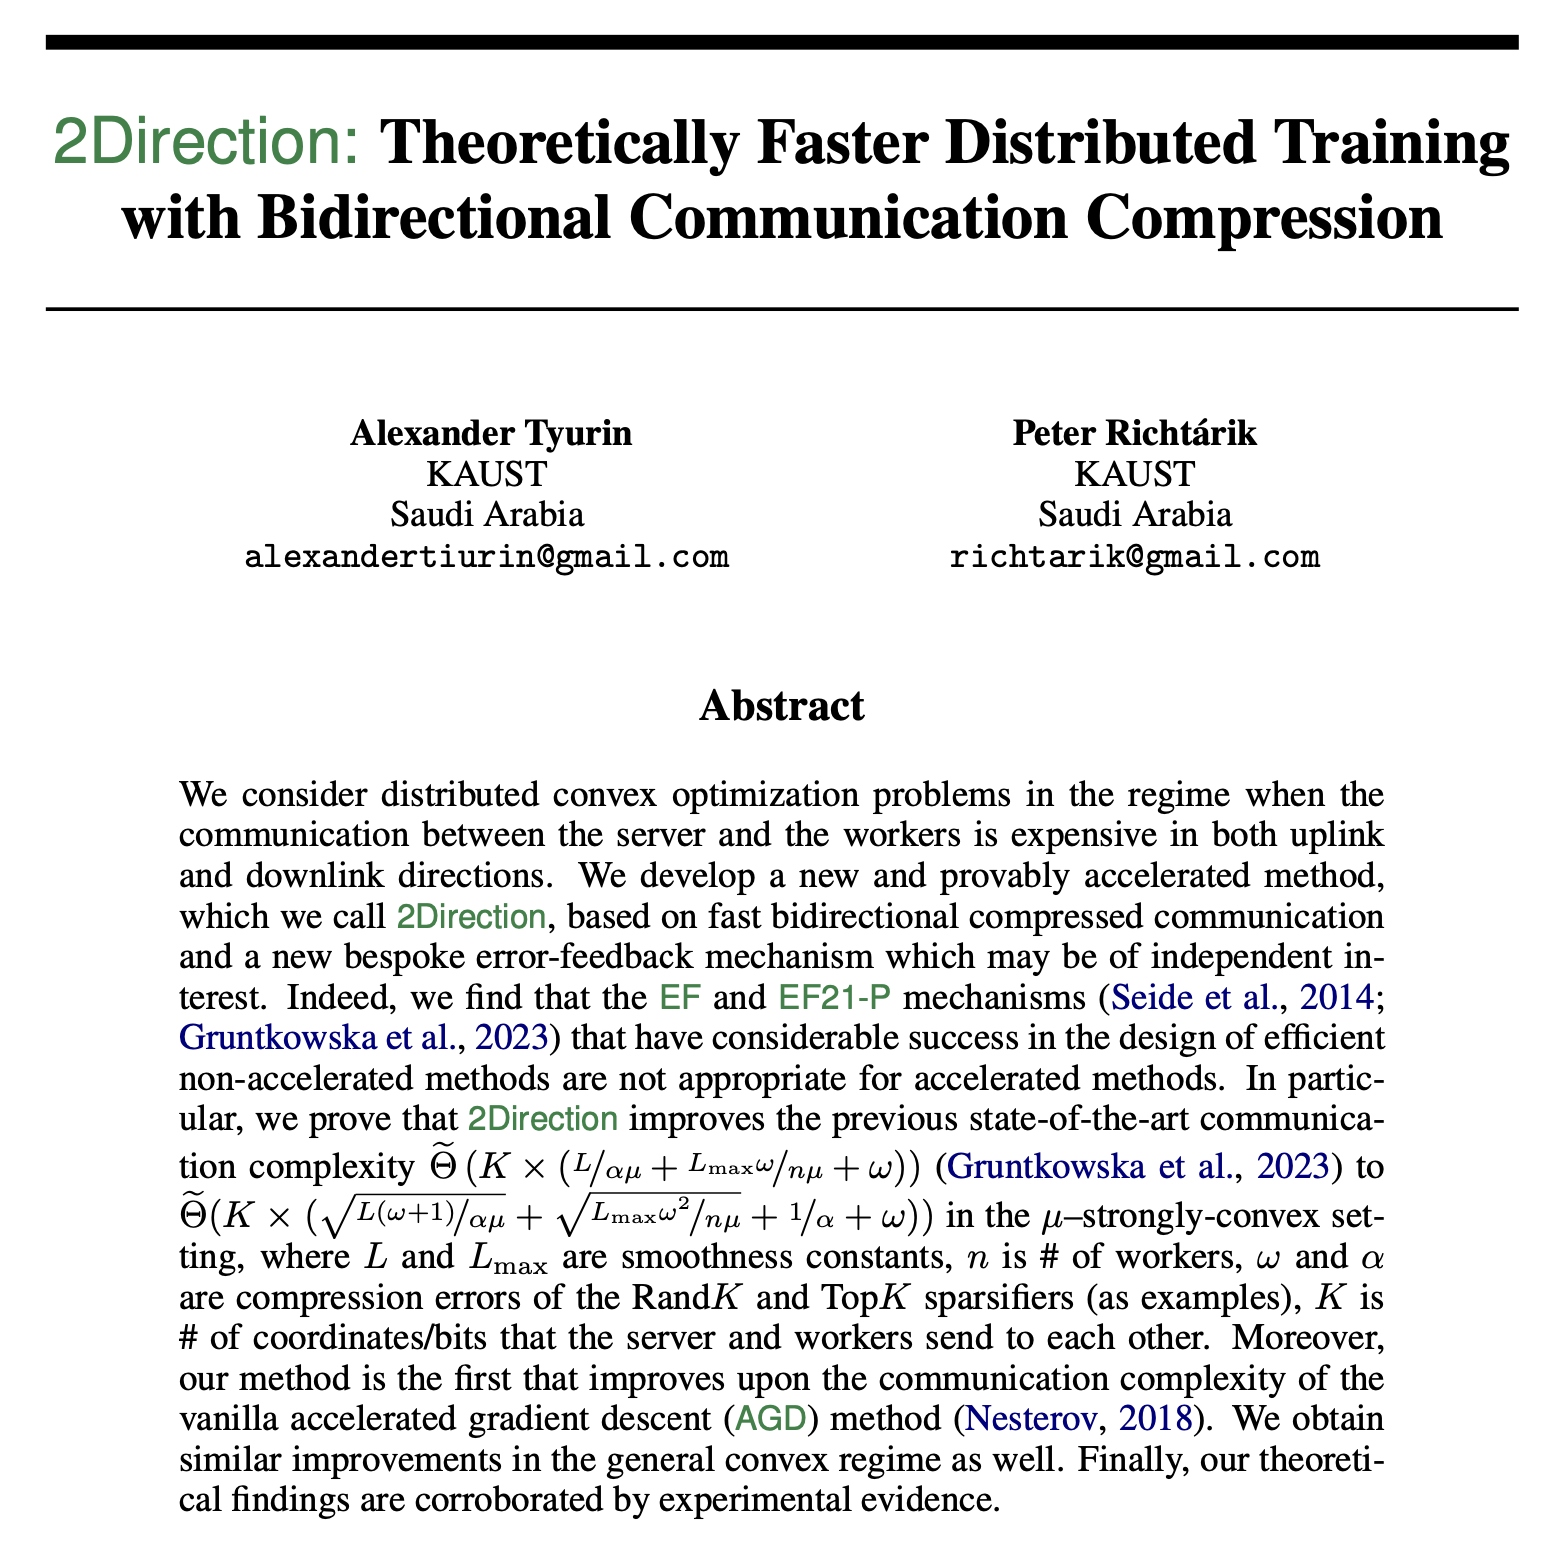 2Direction: Theoretically Faster Distributed Training with Bidirectional Communication Compression